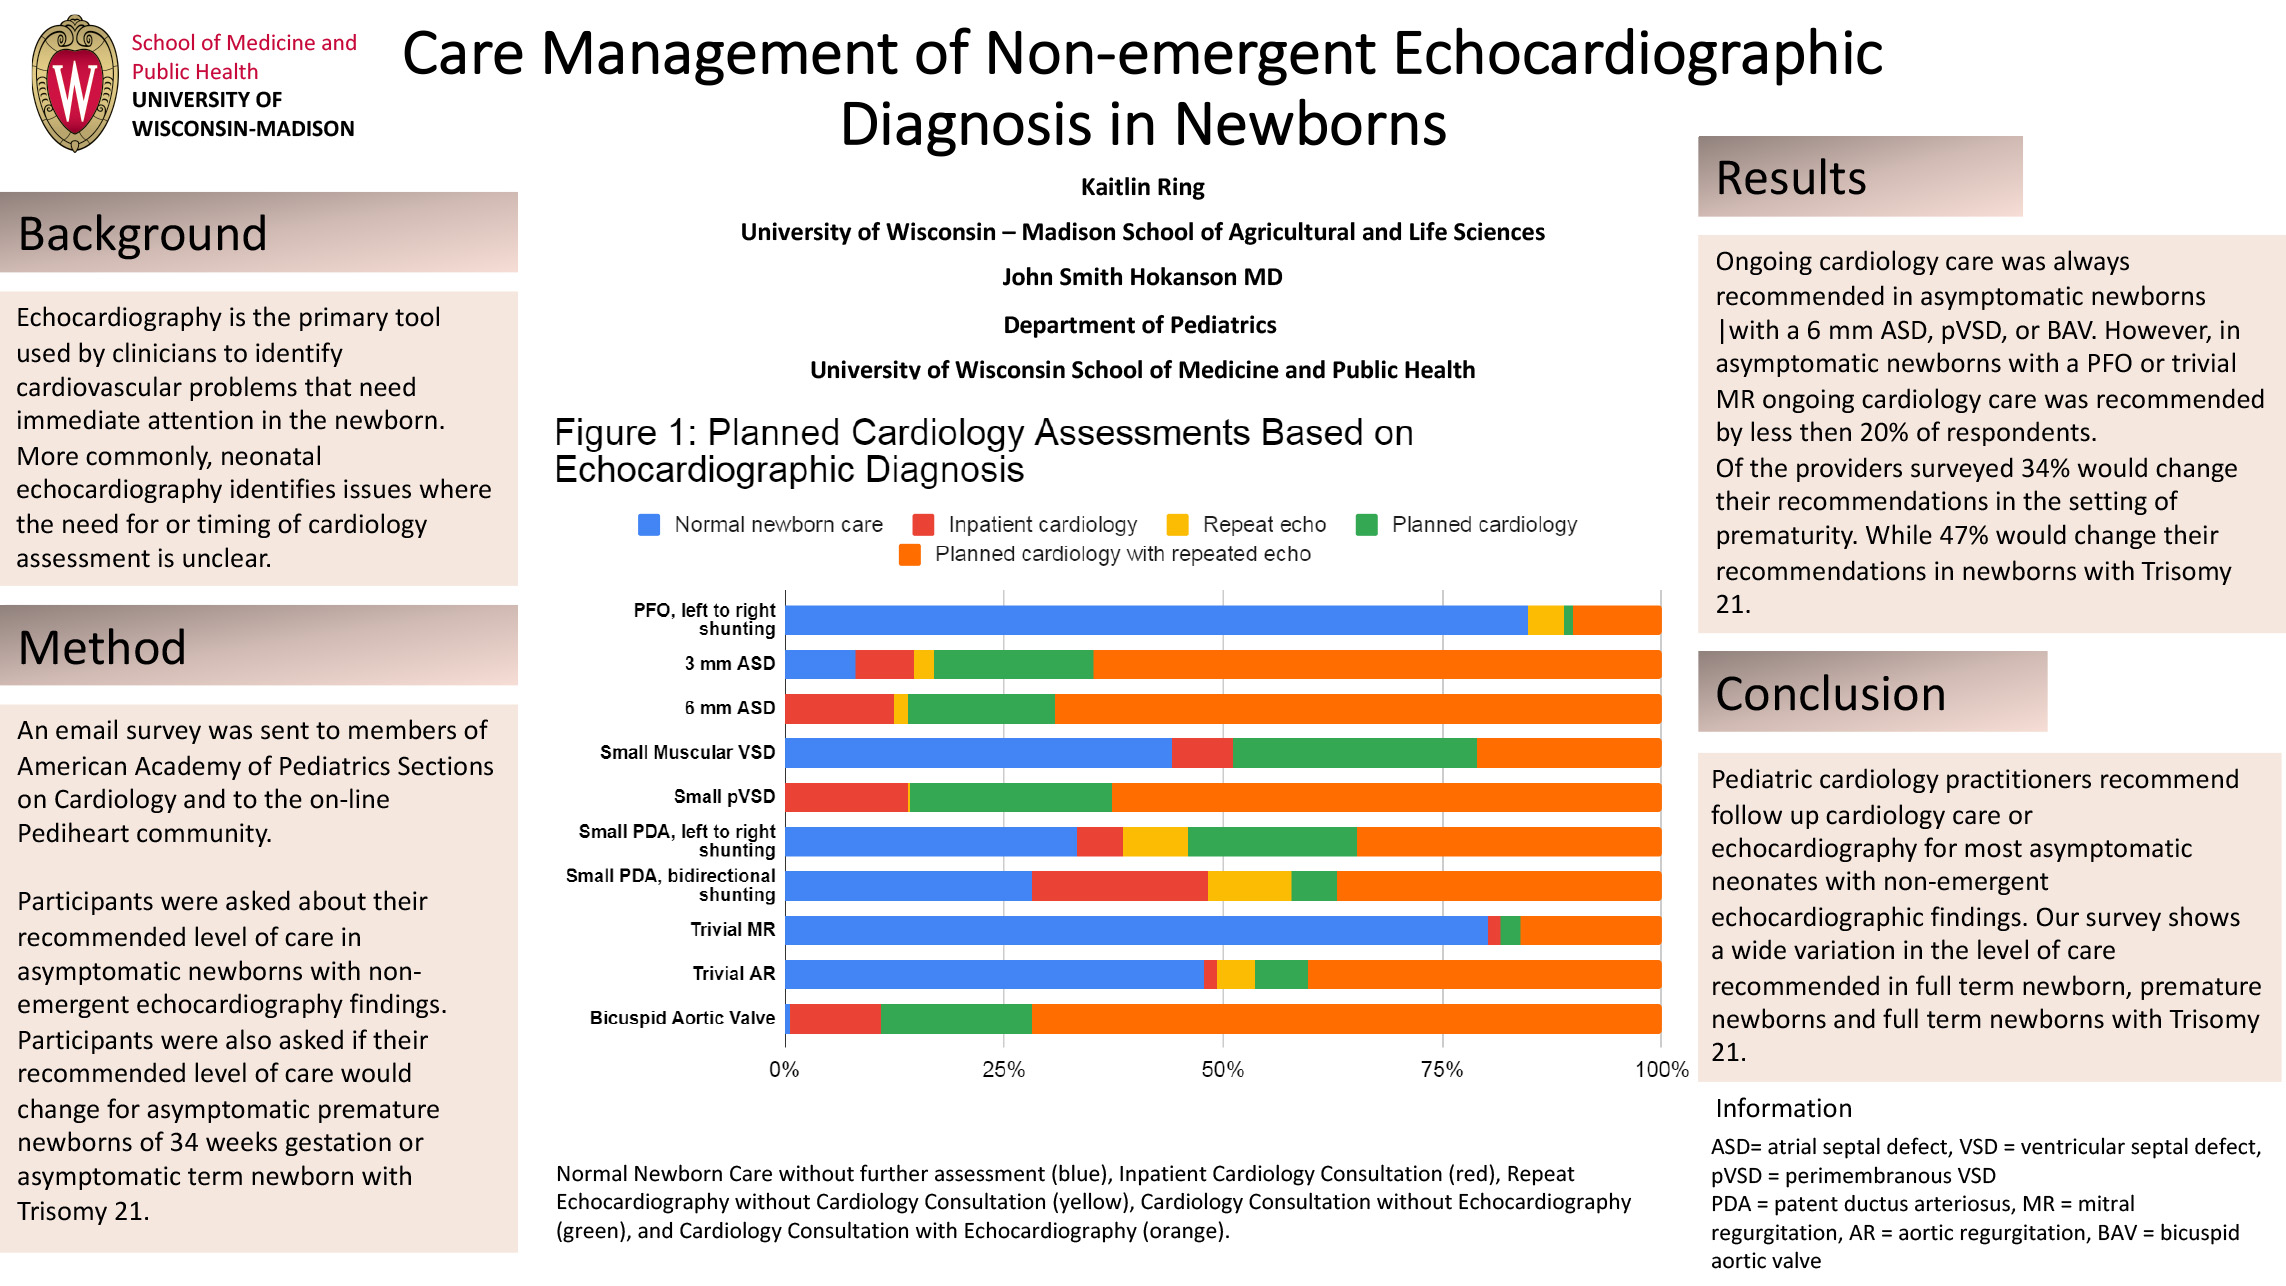 Care Management of Non-emergent Echocardiographic Diagnosis in Newborns poster image